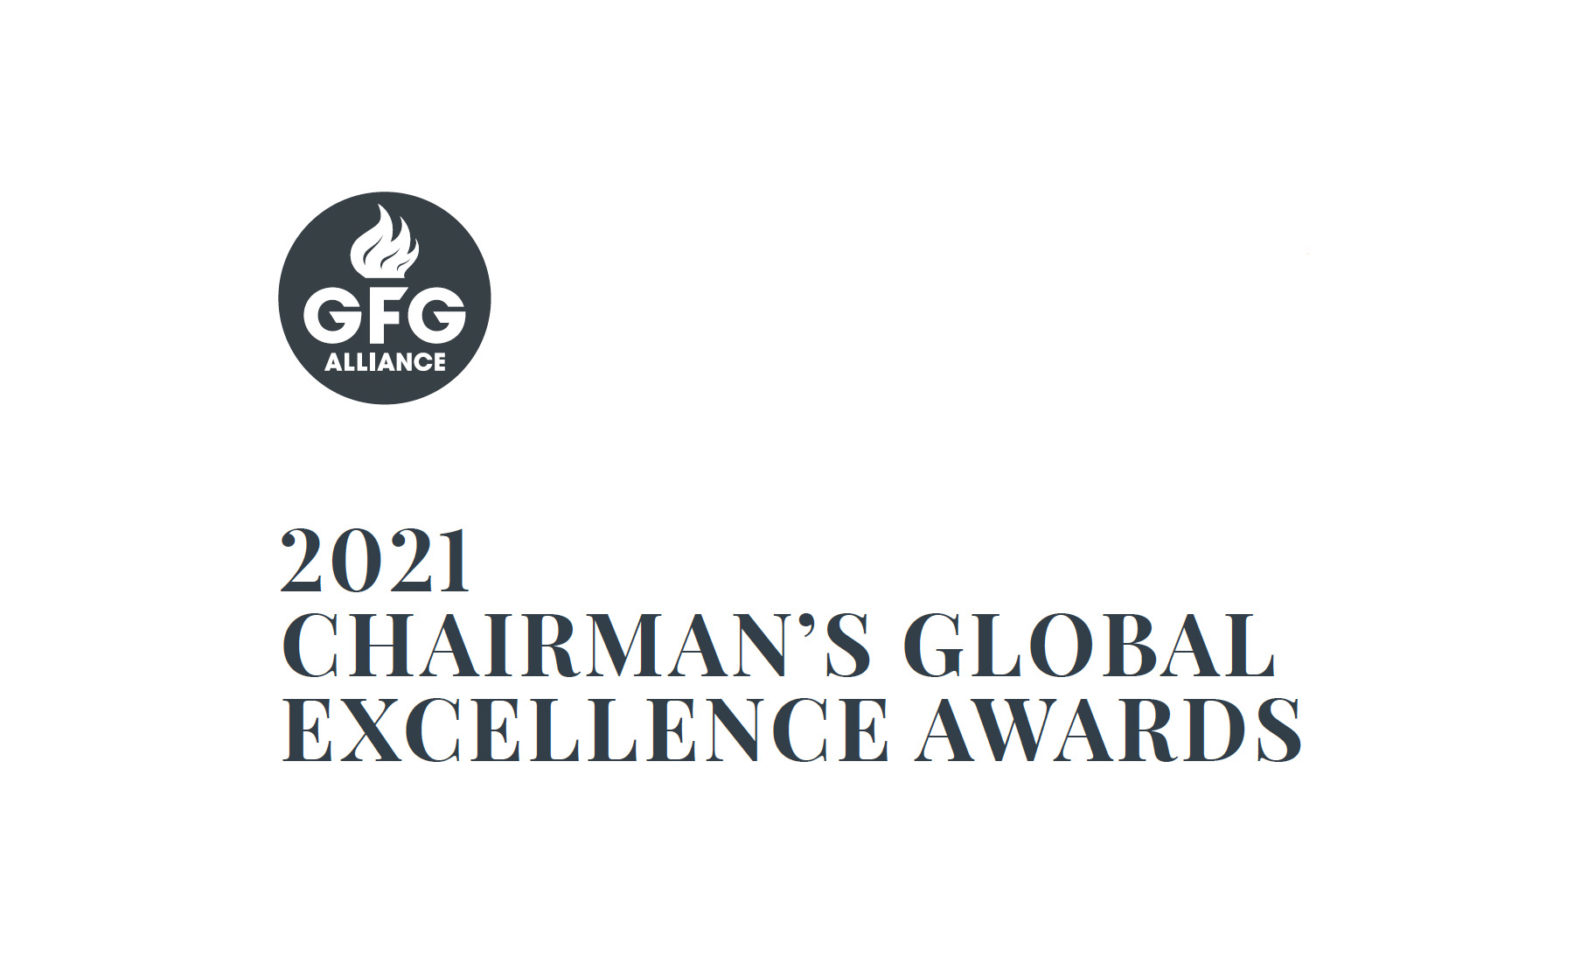 A special broadcast to all GFG Alliance colleagues across the world